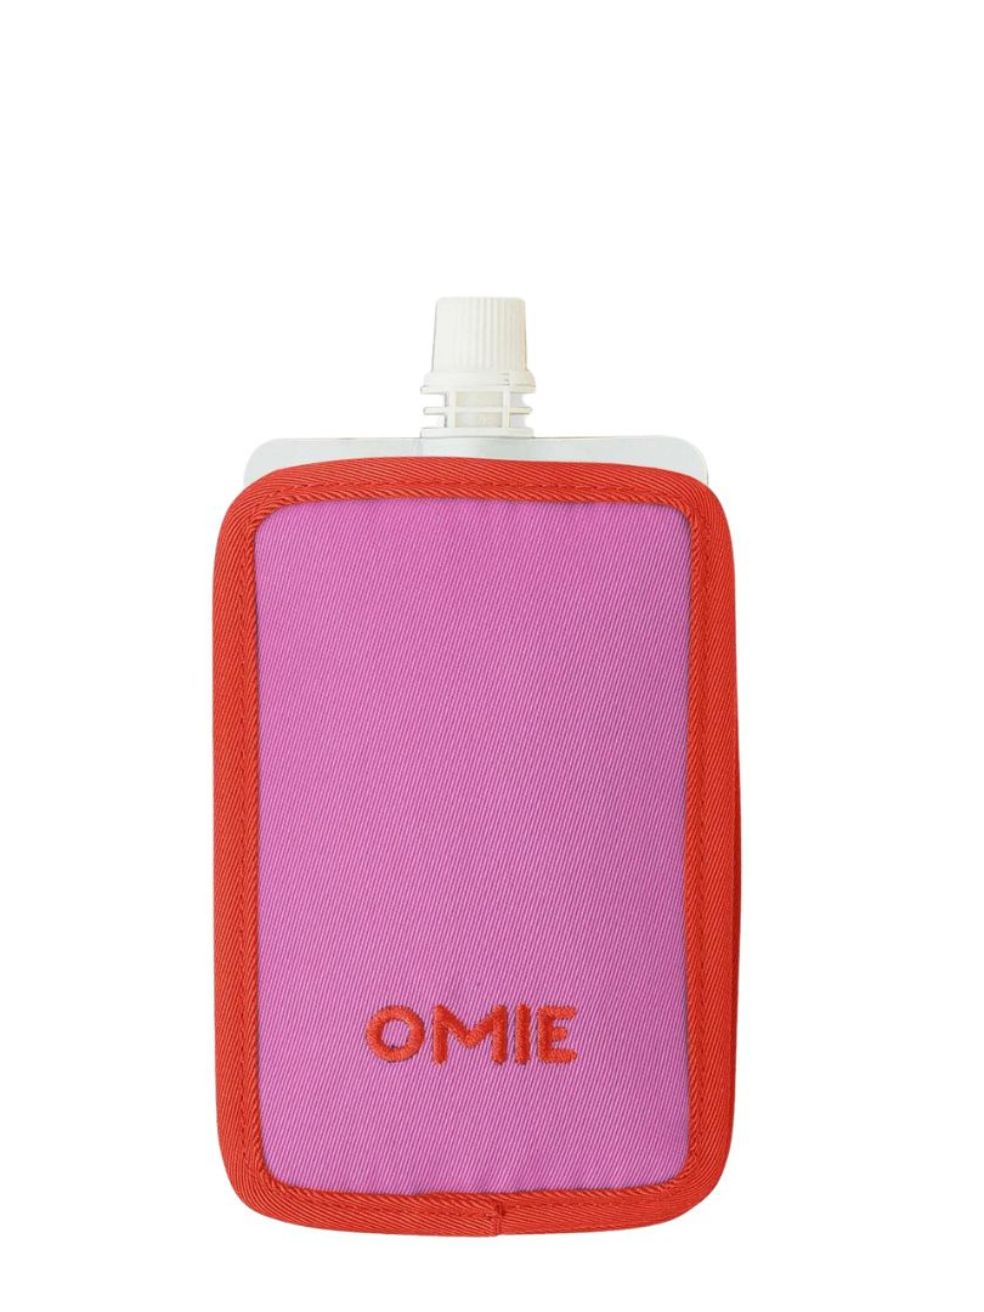 Omie Chill Cooler Punch Pouch Pink